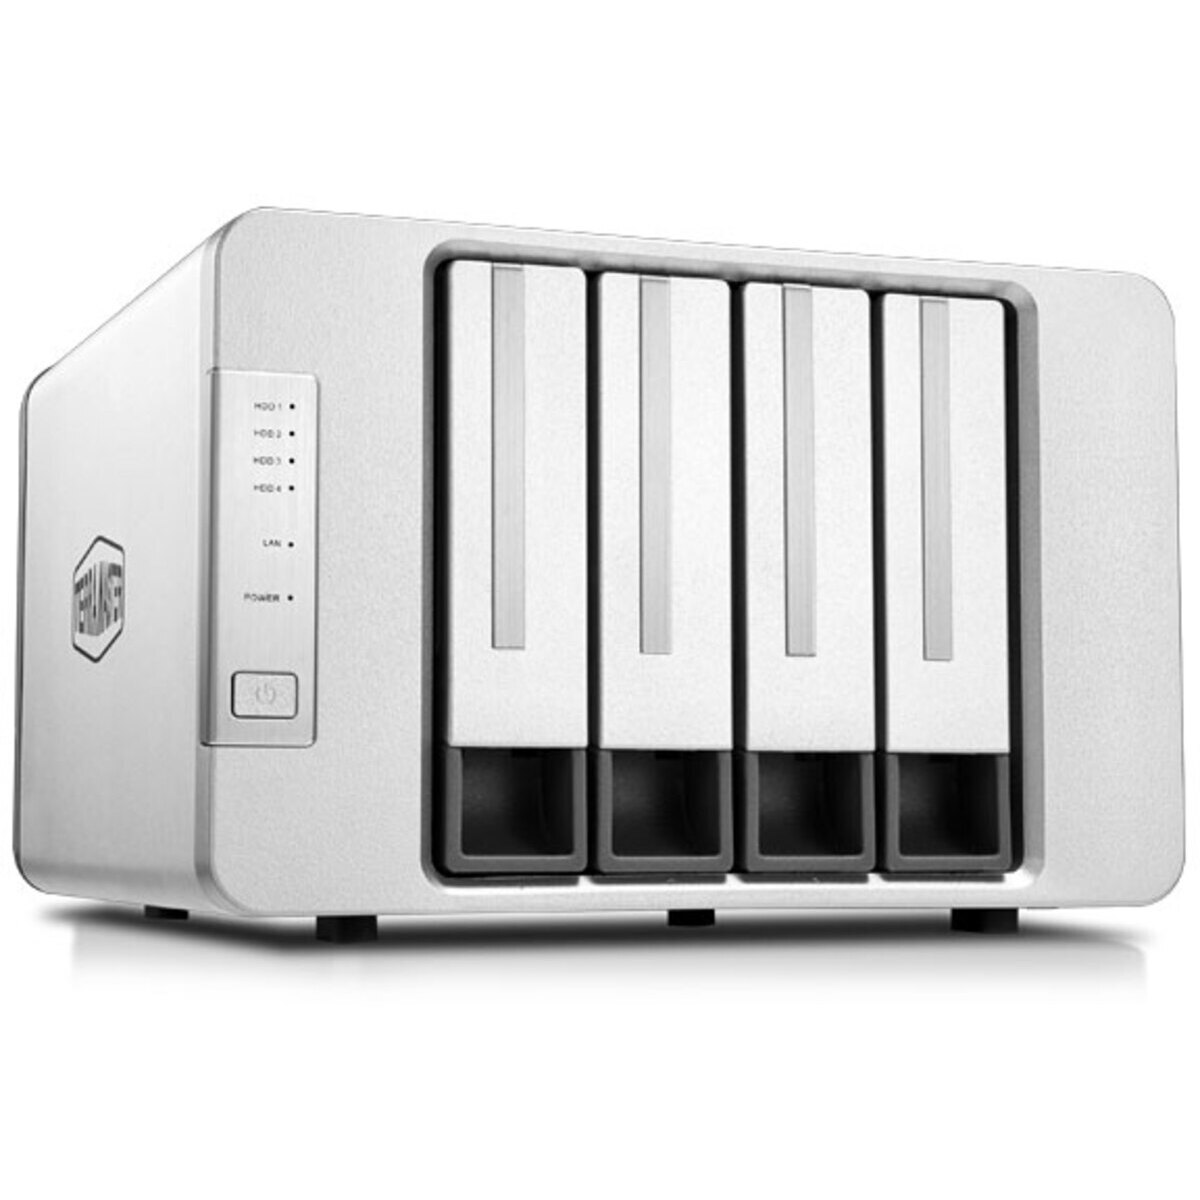 TerraMaster F4-223 24tb 4-Bay Desktop Personal / Basic Home / Small Office NAS - Network Attached Storage Device 3x8tb Western Digital Gold WD8005FRYZ 3.5 7200rpm SATA 6Gb/s HDD ENTERPRISE Class Drives Installed - Burn-In Tested - FREE RAM UPGRADE F4-223